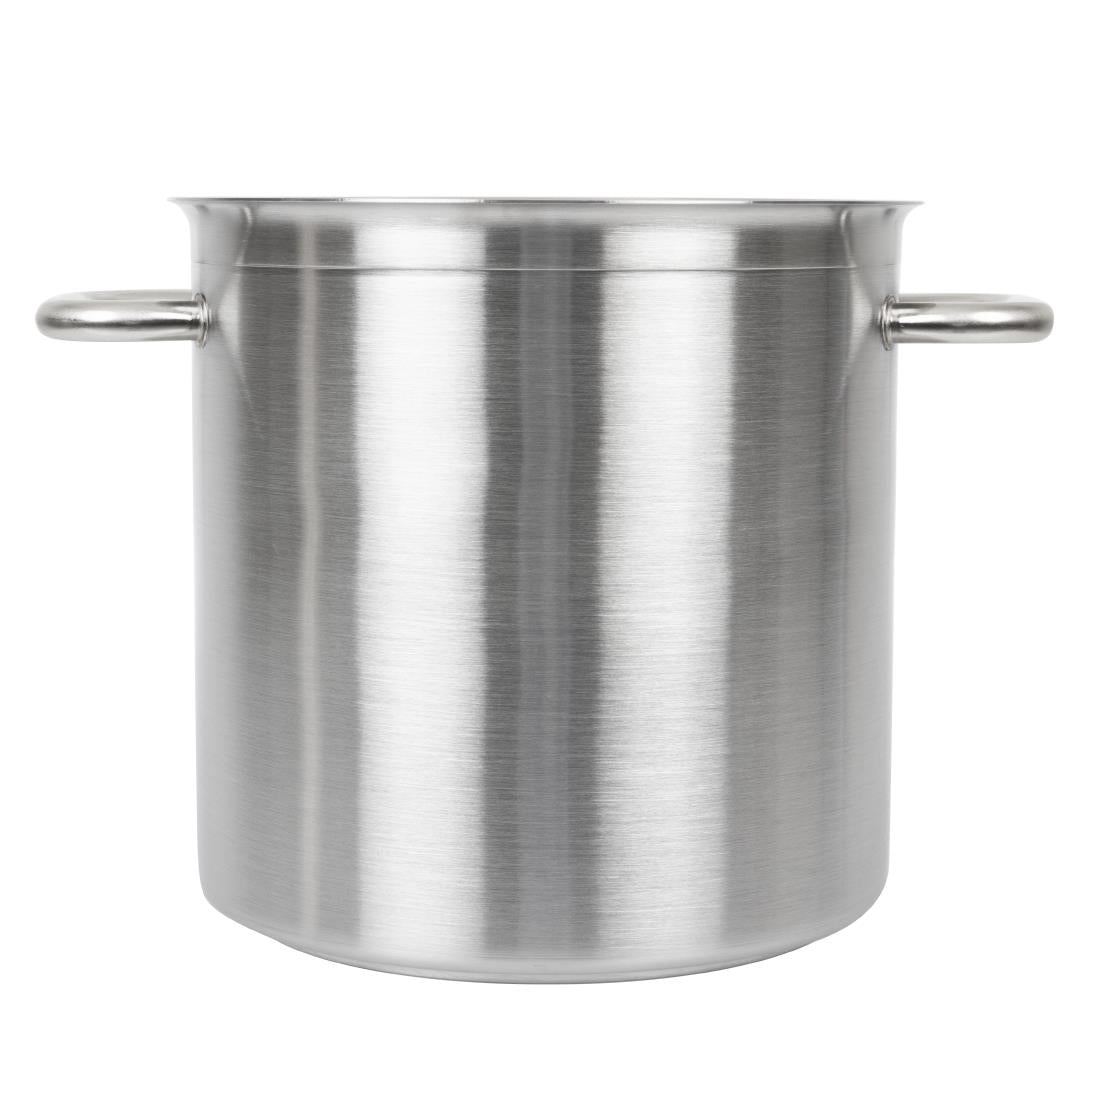 Bourgeat Excellence Stock Pot 17.2Ltr JD Catering Equipment Solutions Ltd